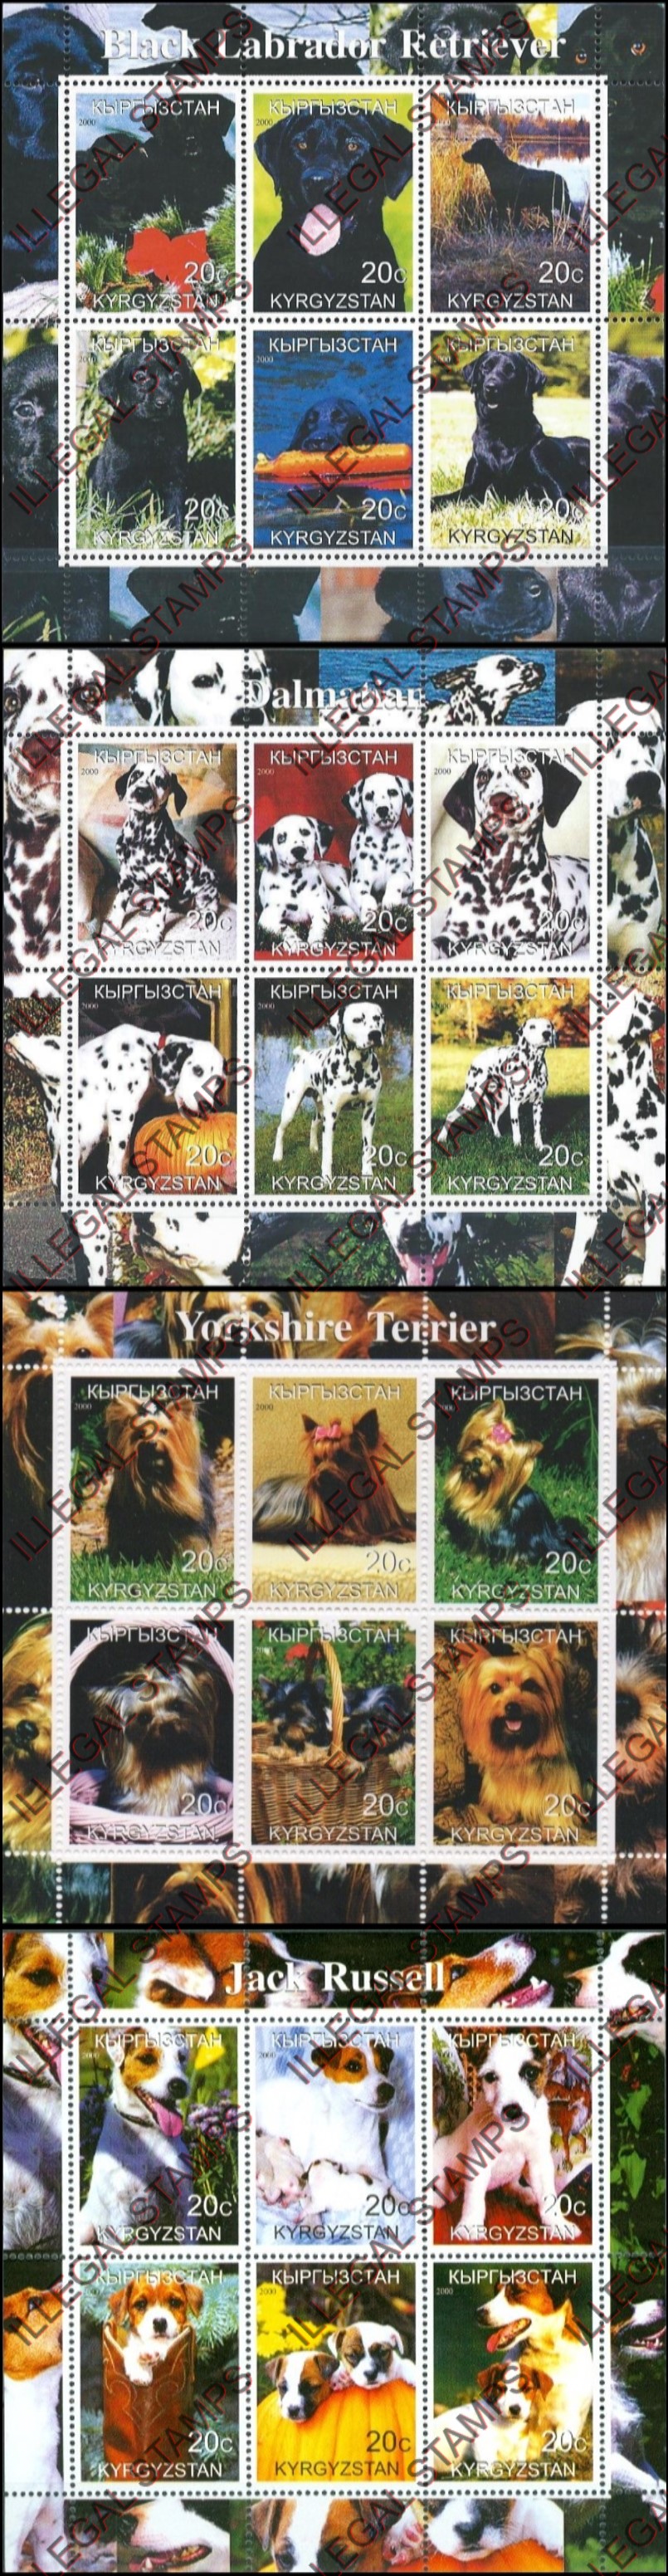 Kyrgyzstan 2000 Dogs Illegal Stamp Sheetlets of Six